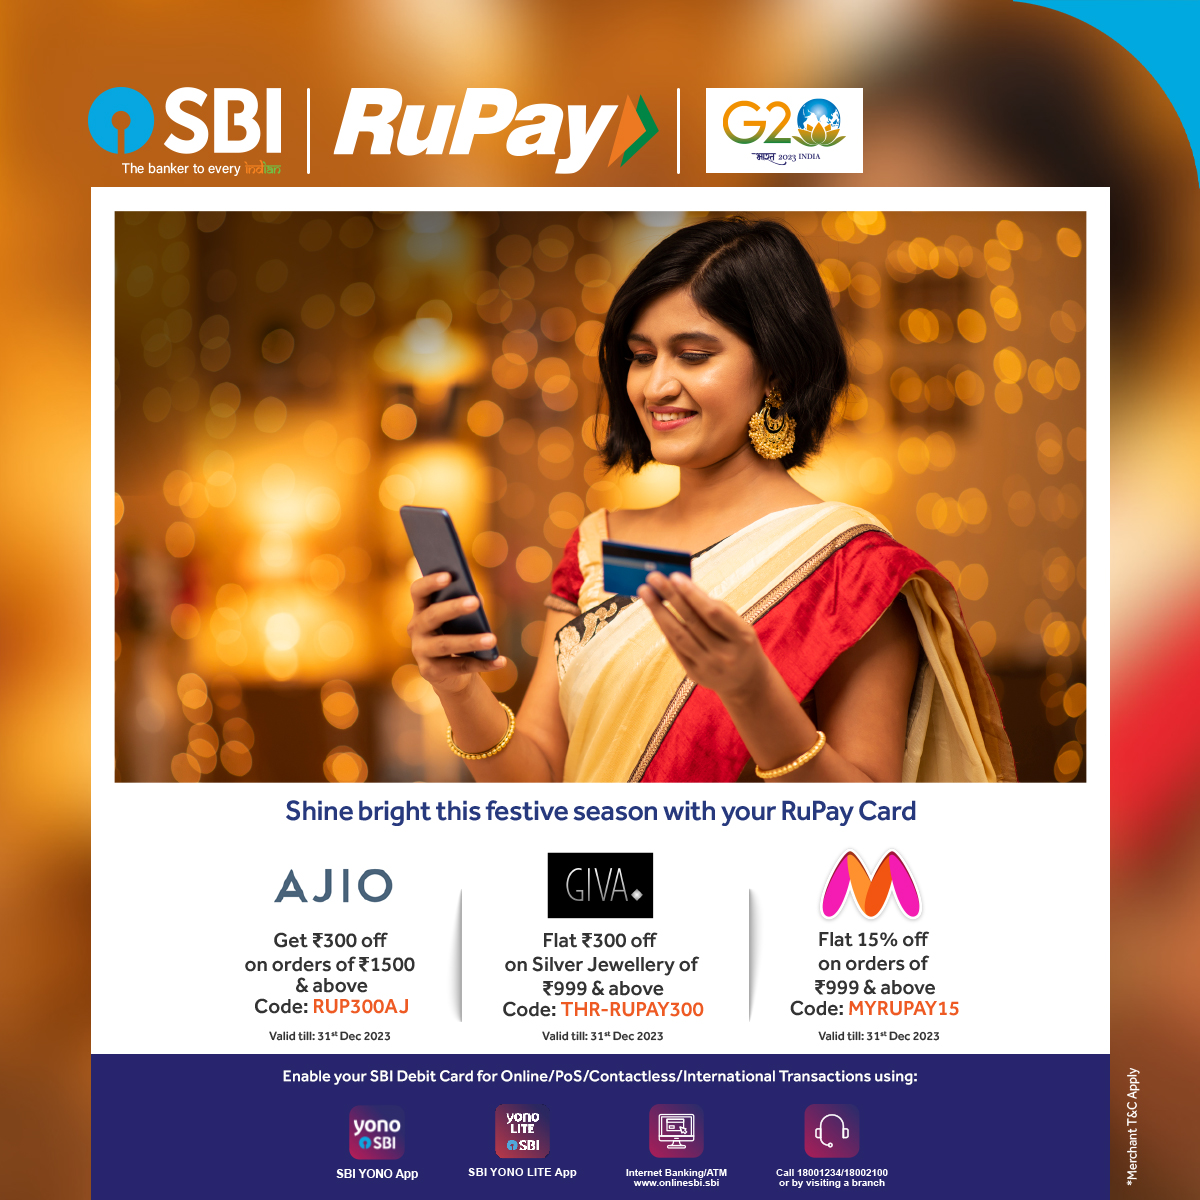 Welcome the festive season with exciting offers for your RuPay Debit Card.

Visit: bank.sbi/web/personal-b…

#SBI #DebitCard #SBIDebitCard #RuPay #FestiveOffers